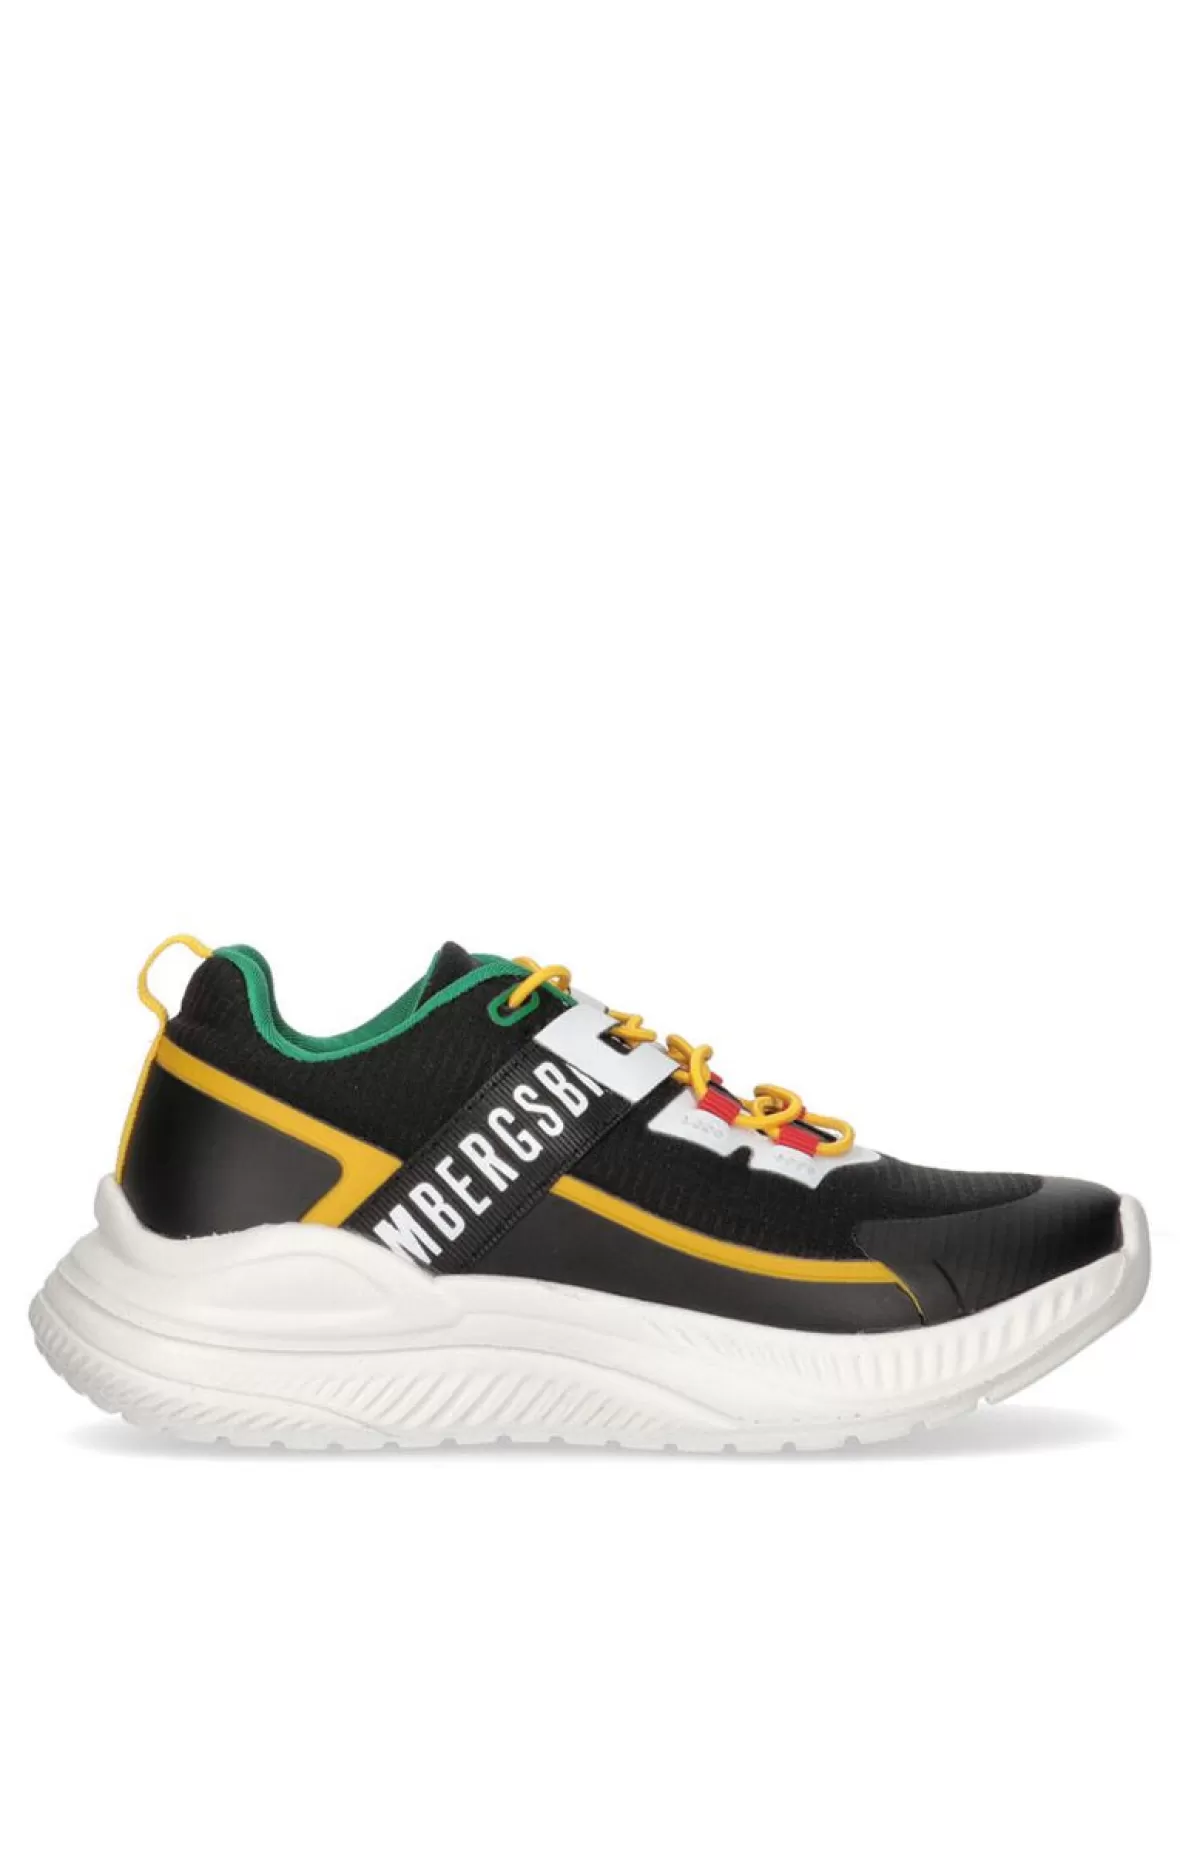 Bikkembergs Boys' Multi Color Chunky Sneakers - Spike White Sale